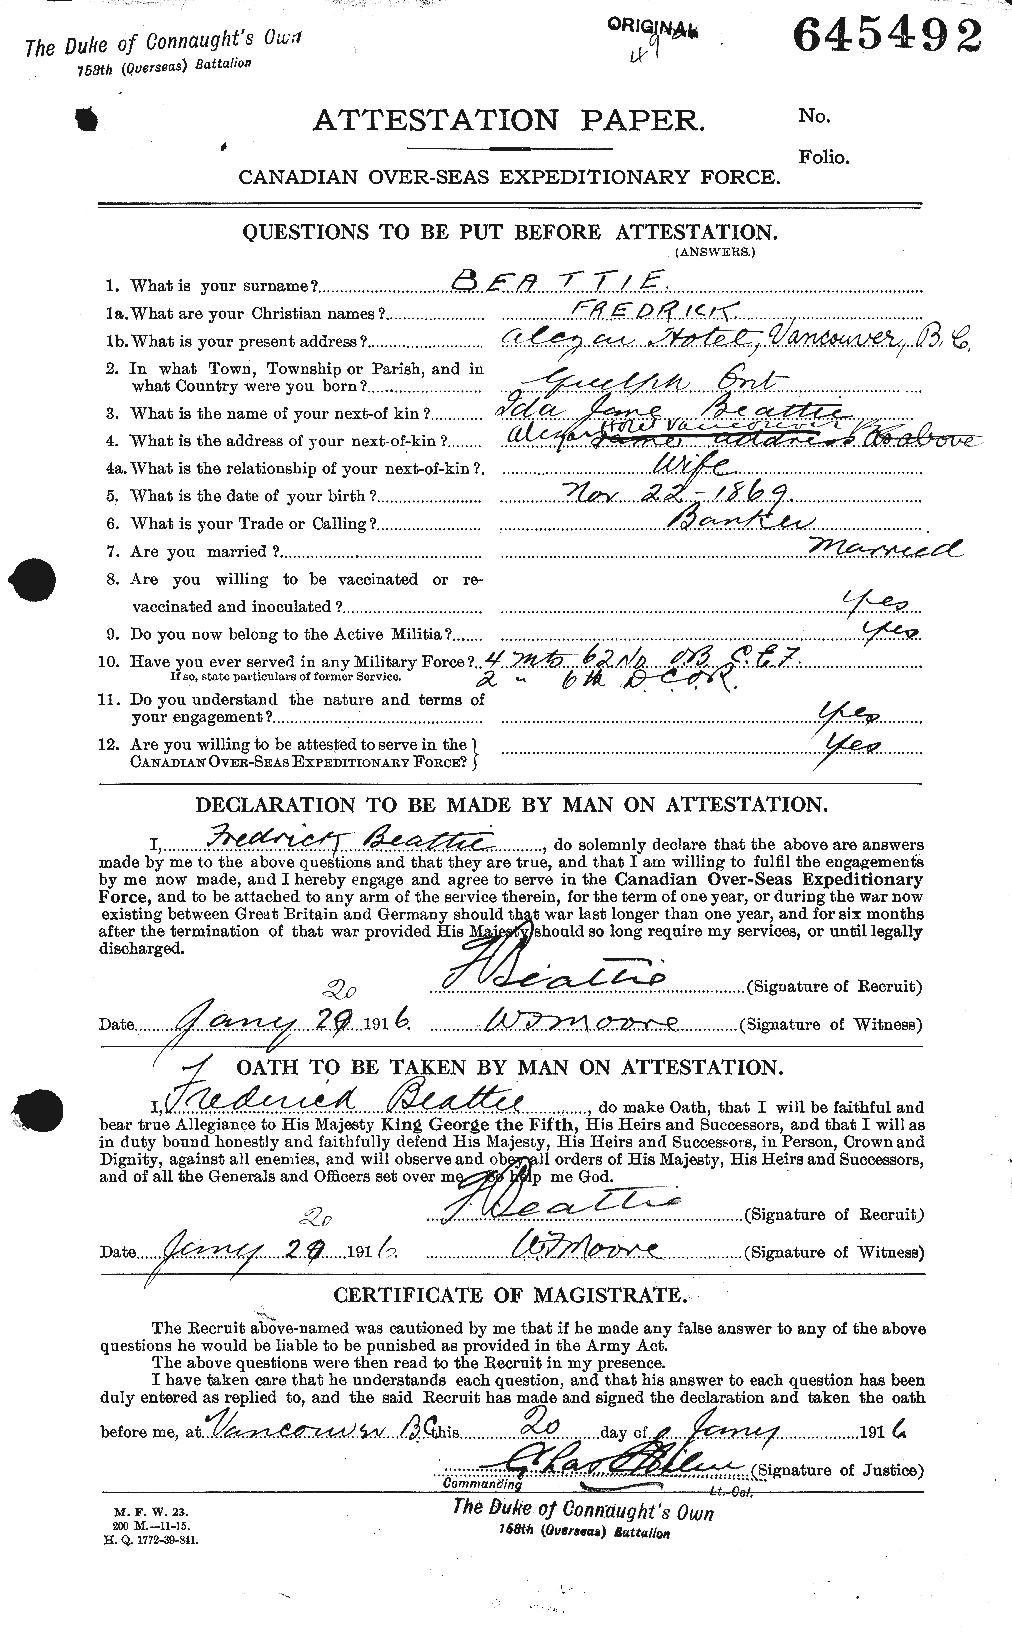 Personnel Records of the First World War - CEF 230689a